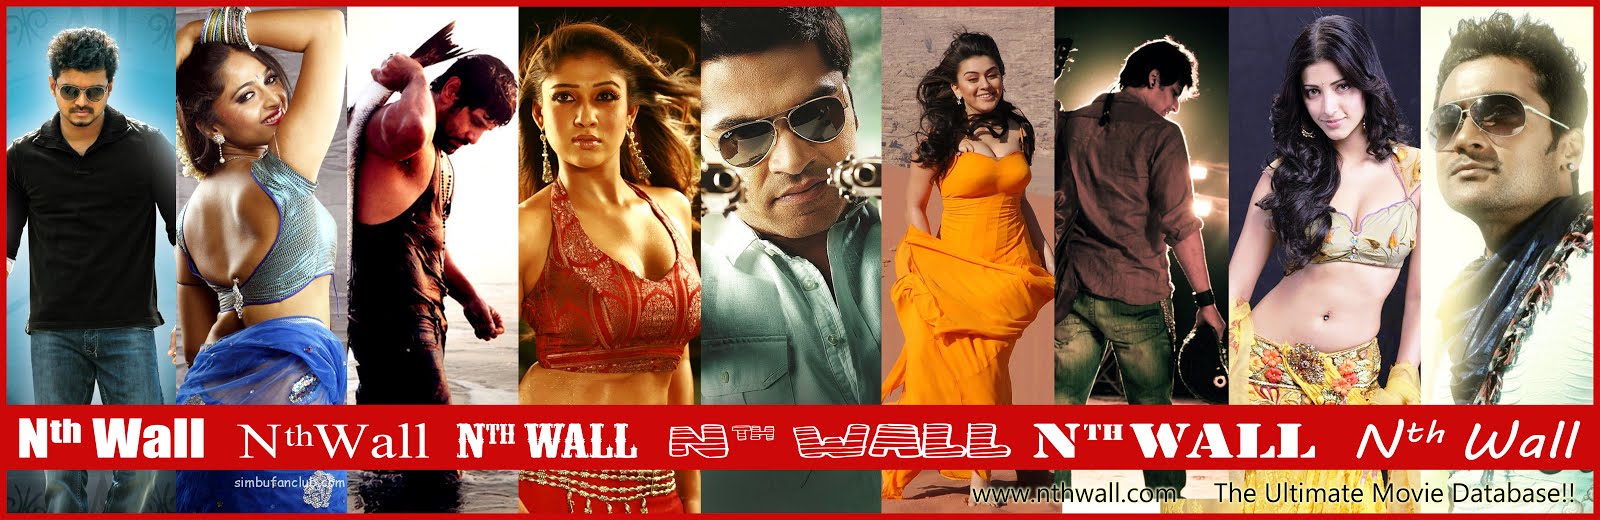 Tamil Movies Trailers News Video Songs Wall Papers Ringtones 